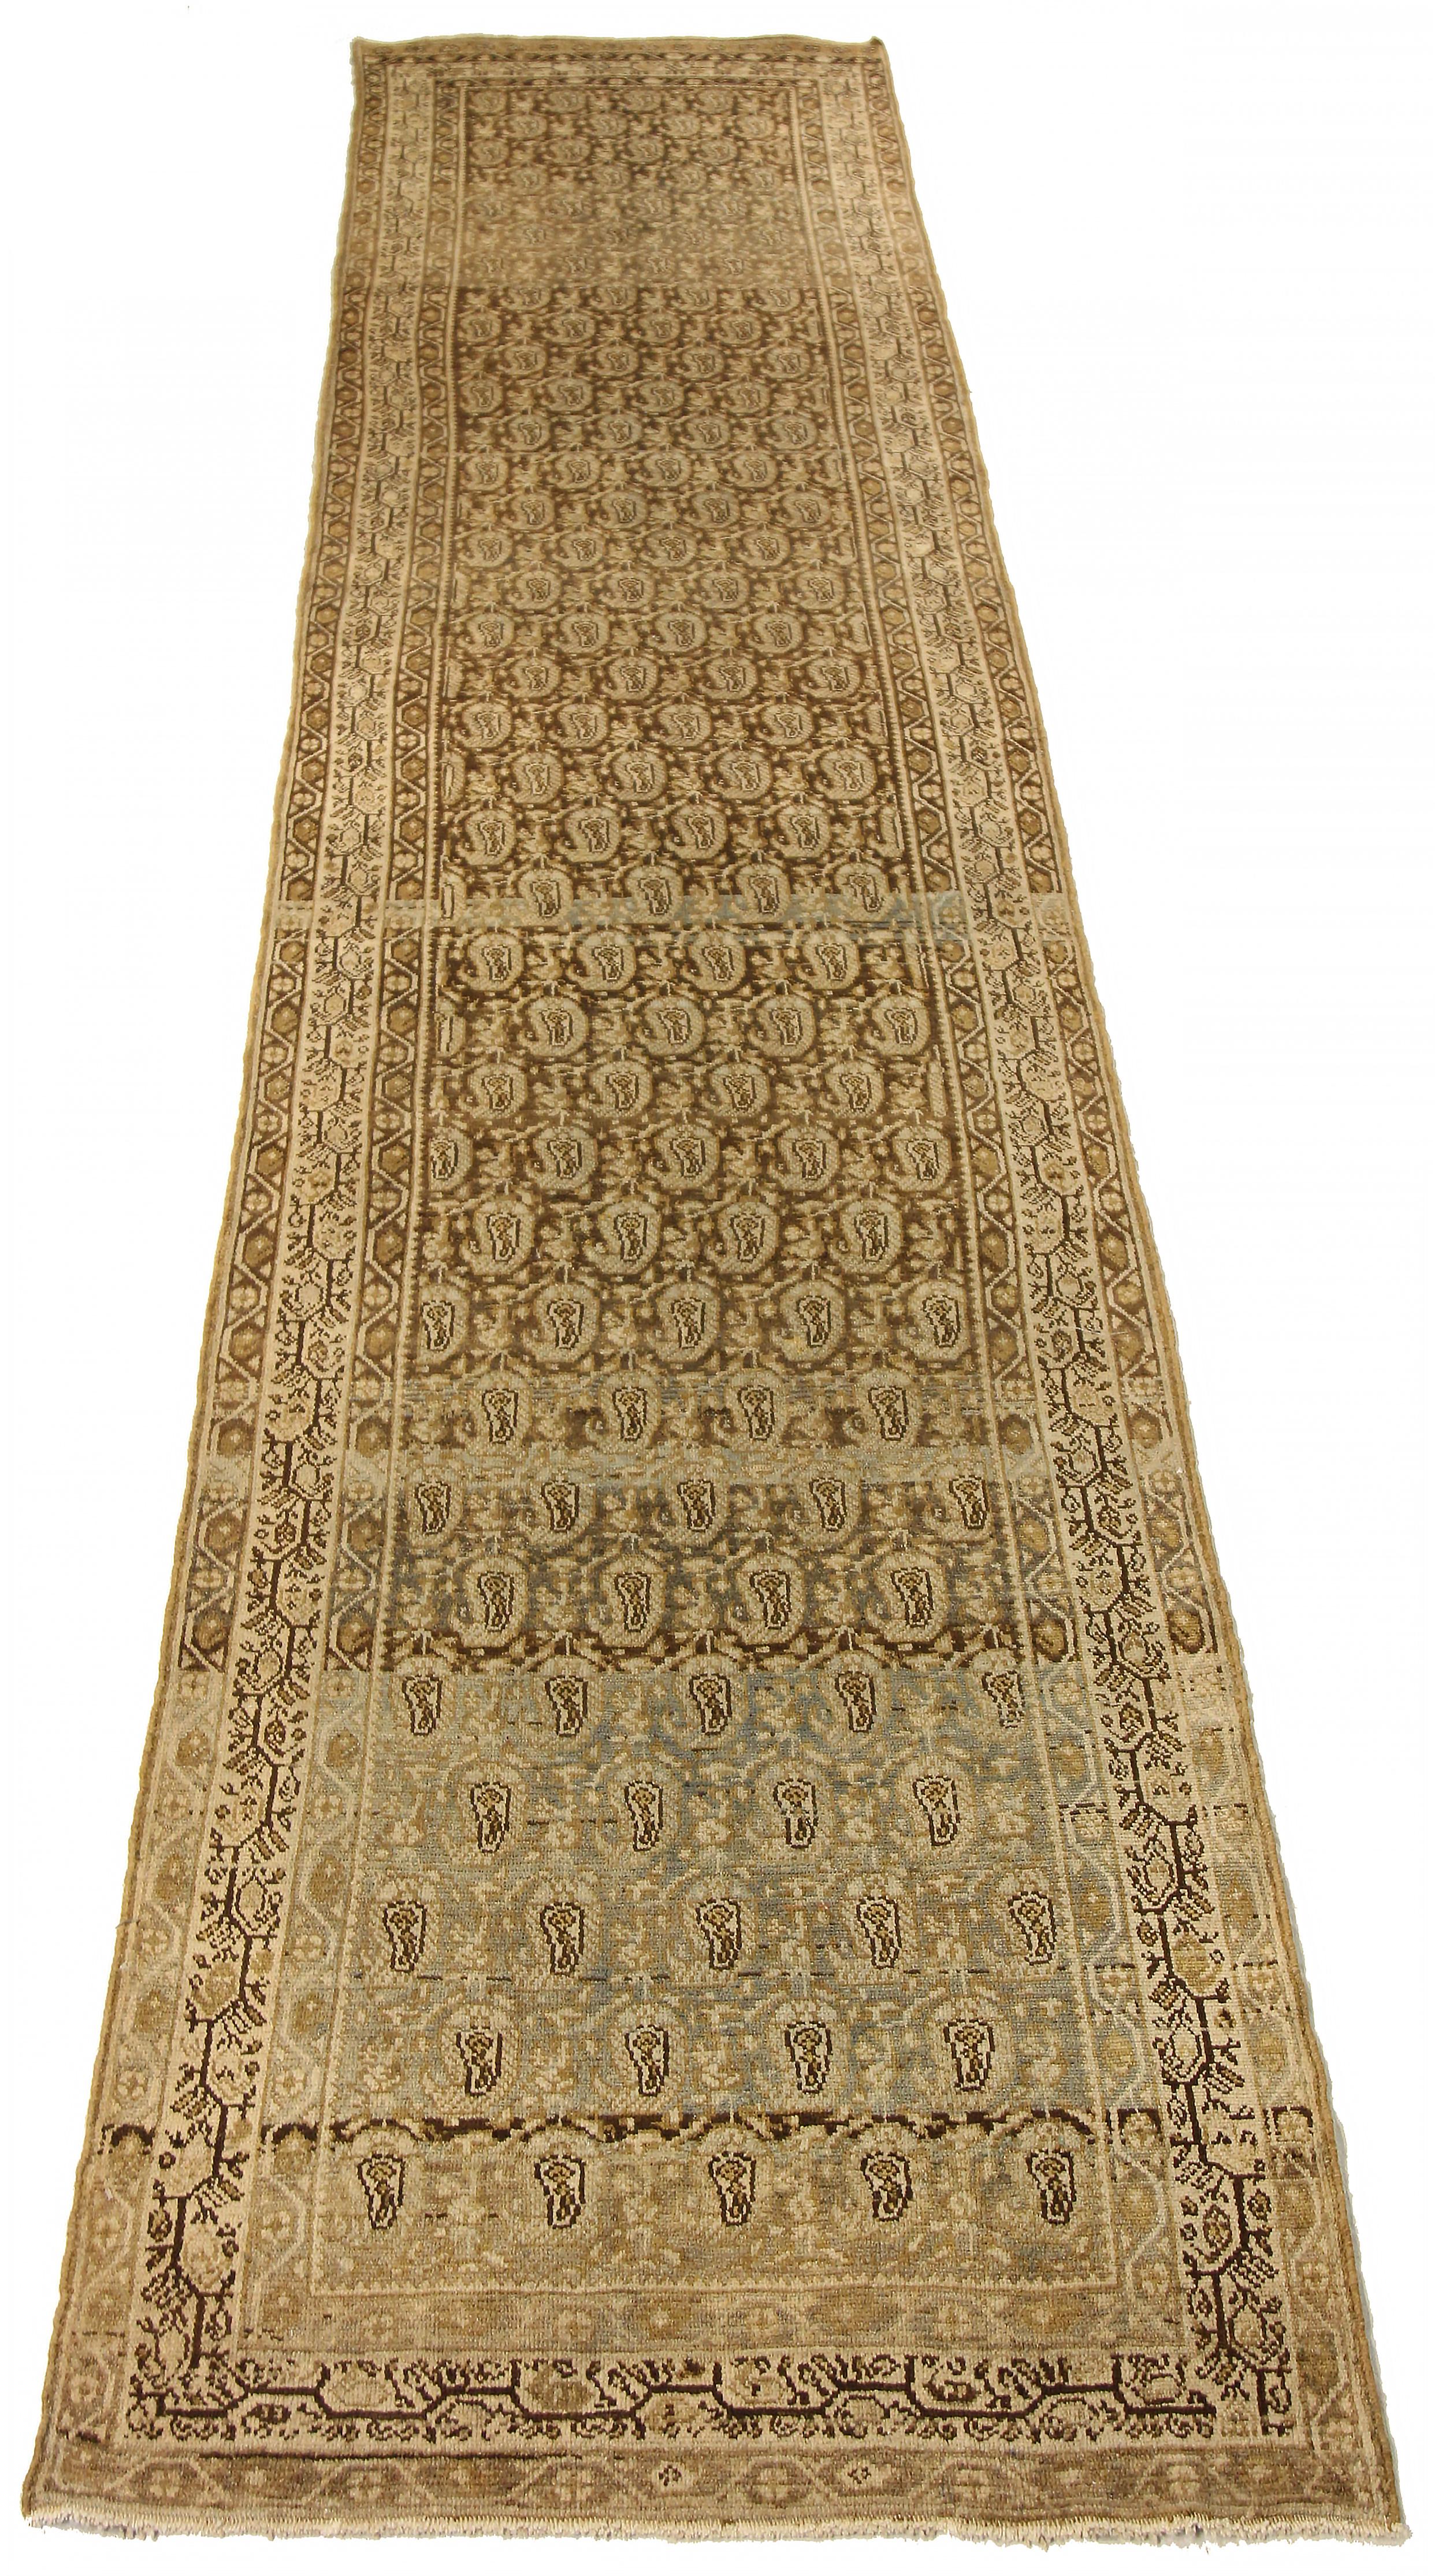 Antique Persian runner rug handwoven from the finest sheep’s wool and colored with all-natural vegetable dyes that are safe for humans and pets. It’s a traditional Malayer design featuring a lovely brown field covered with beige, brown floral and